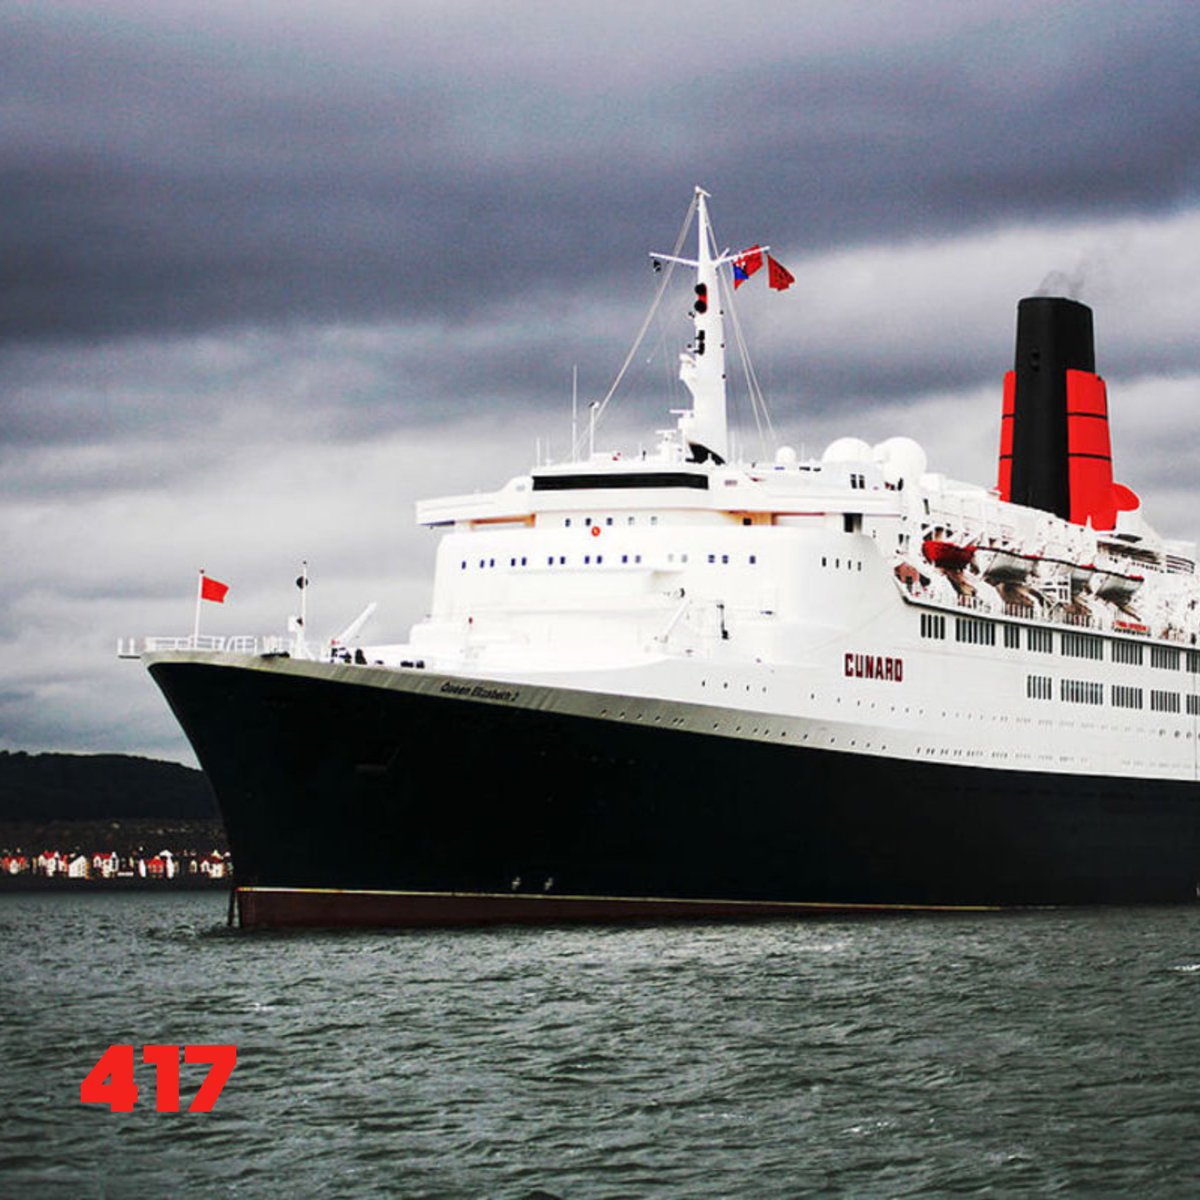 On May 2, 1969, the Cunard ocean liner Queen Elizabeth 2 departed on her maiden voyage to New York City. Today also marks 417 days since Cllr Sarah Warren said she wanted a healthy debate on LTNs and how we get around in Bath. It seems that ship has sailed.